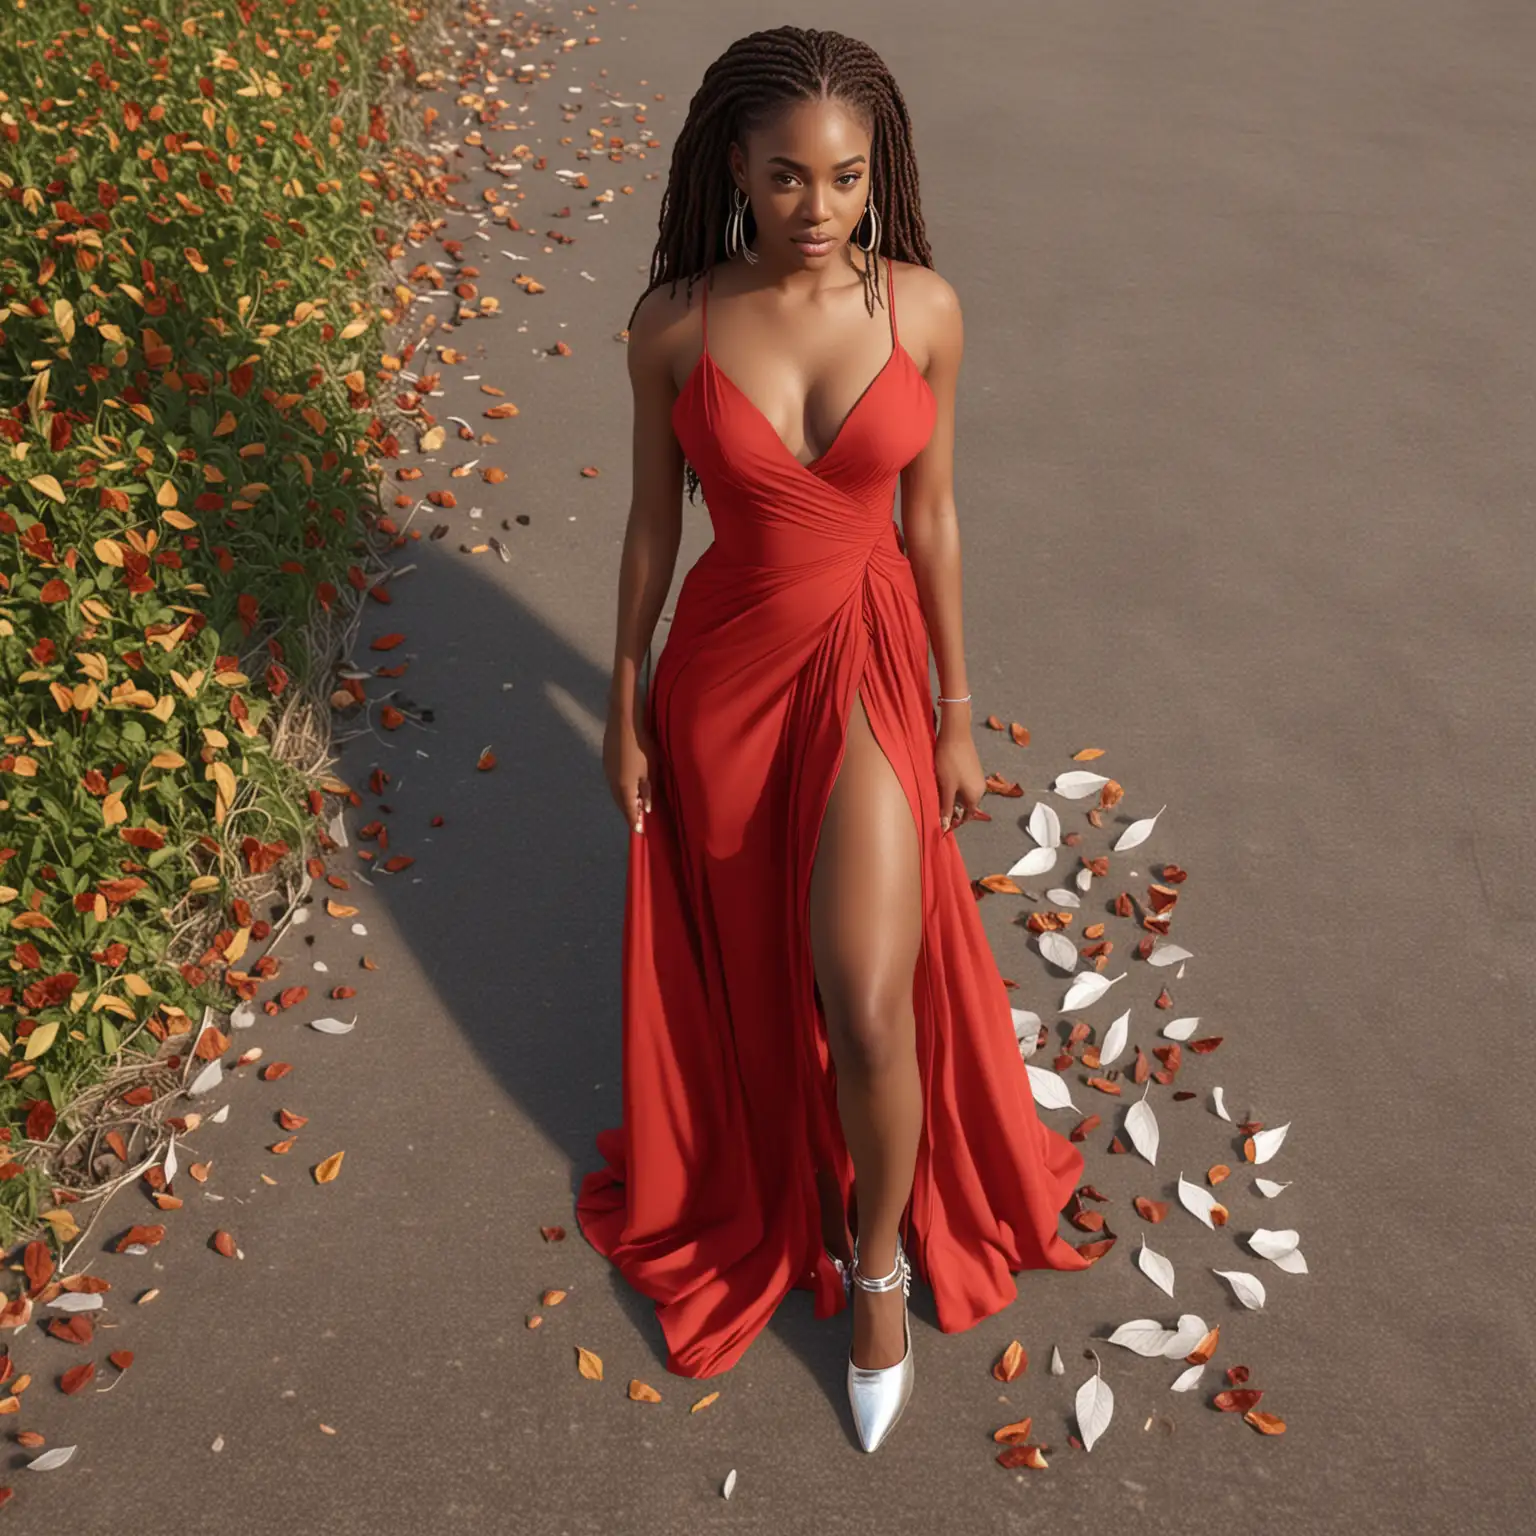 African American Woman in Elegant Red Dress with Silver Accents